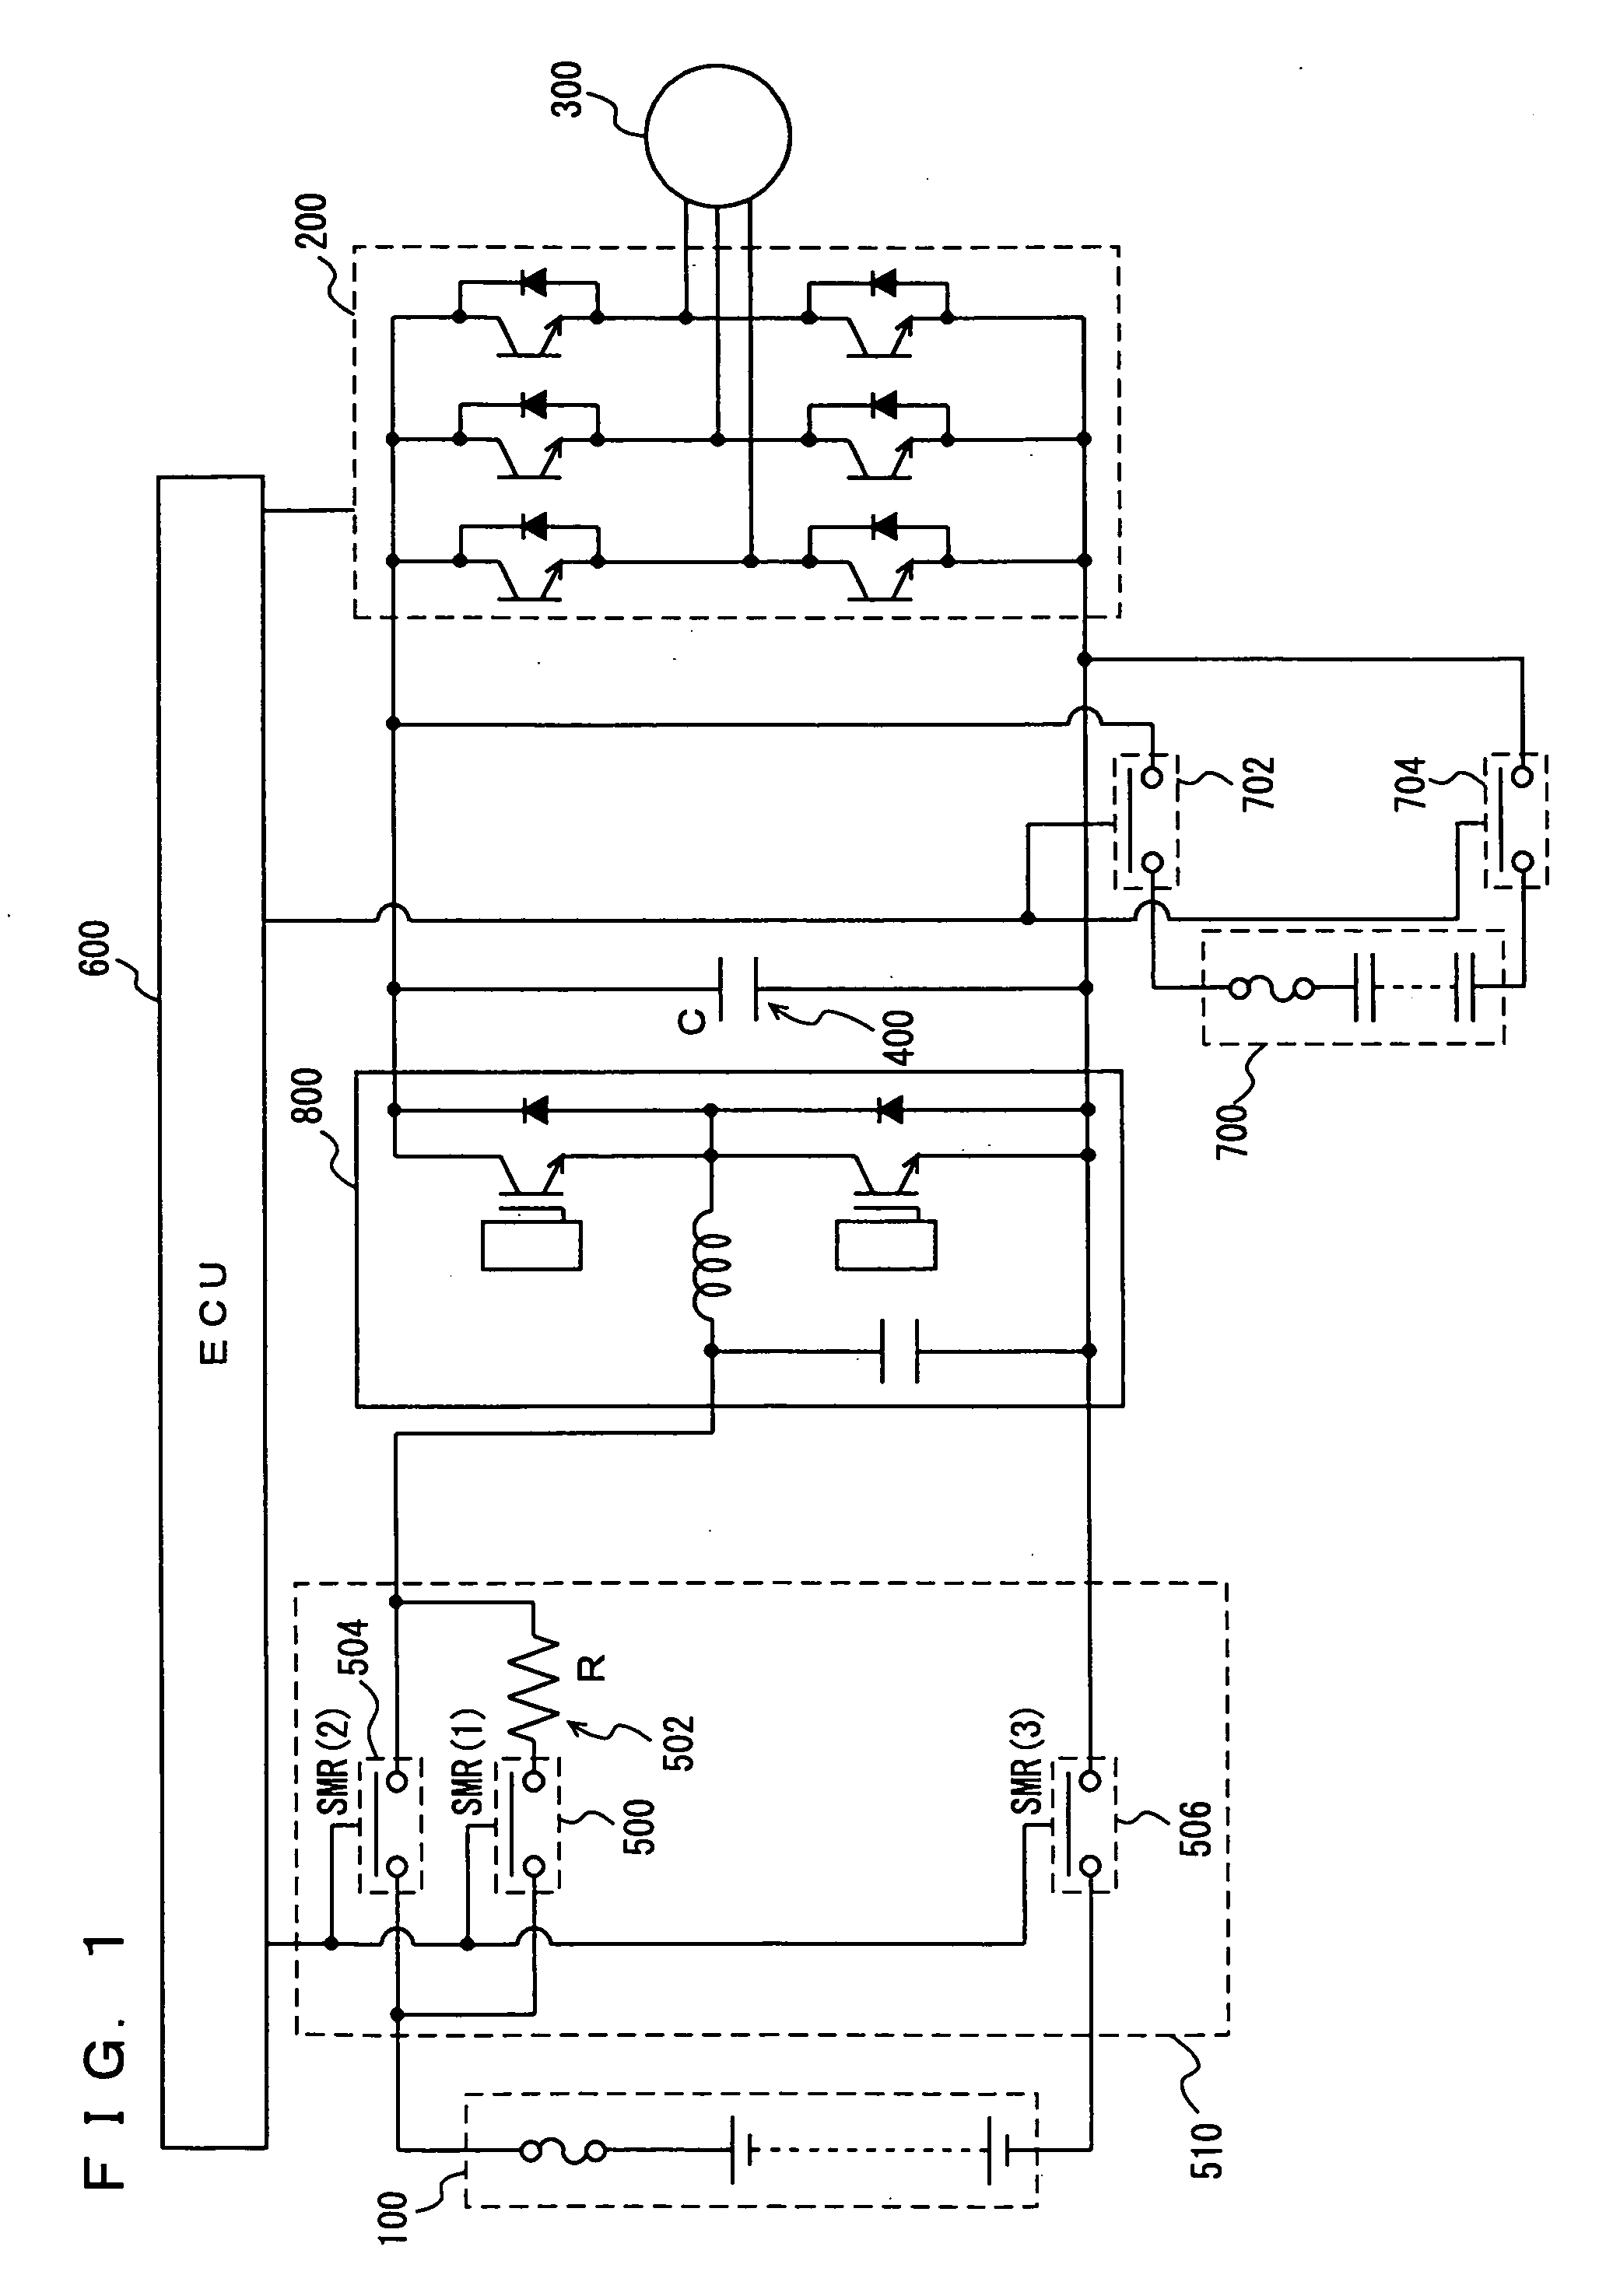 Vehicle power controller